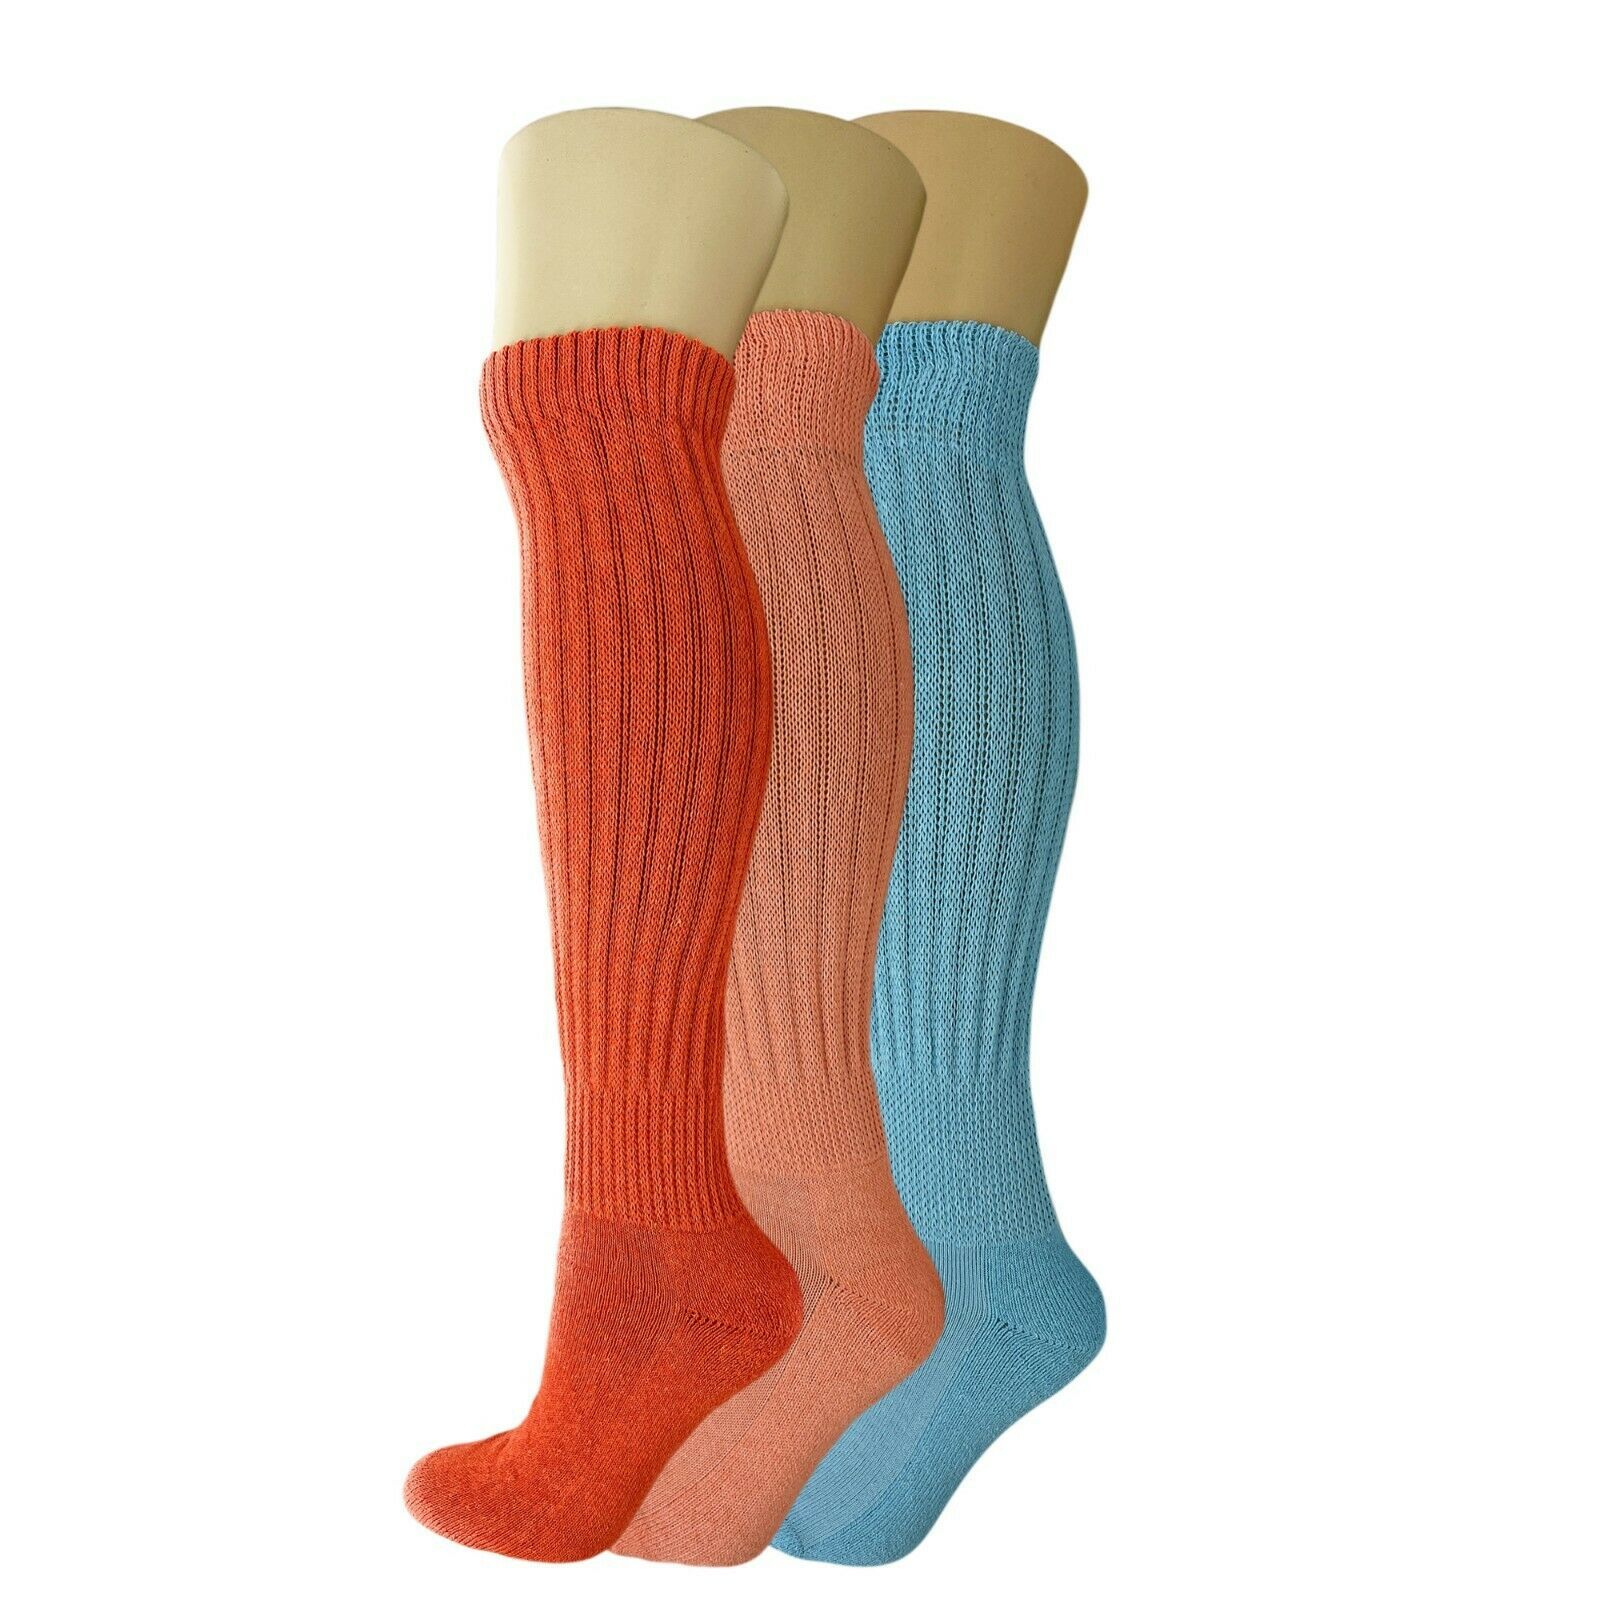 3 Pack Slouch Socks Cotton Colorful Heavy Knee High Scrunch Socks Size 9-11